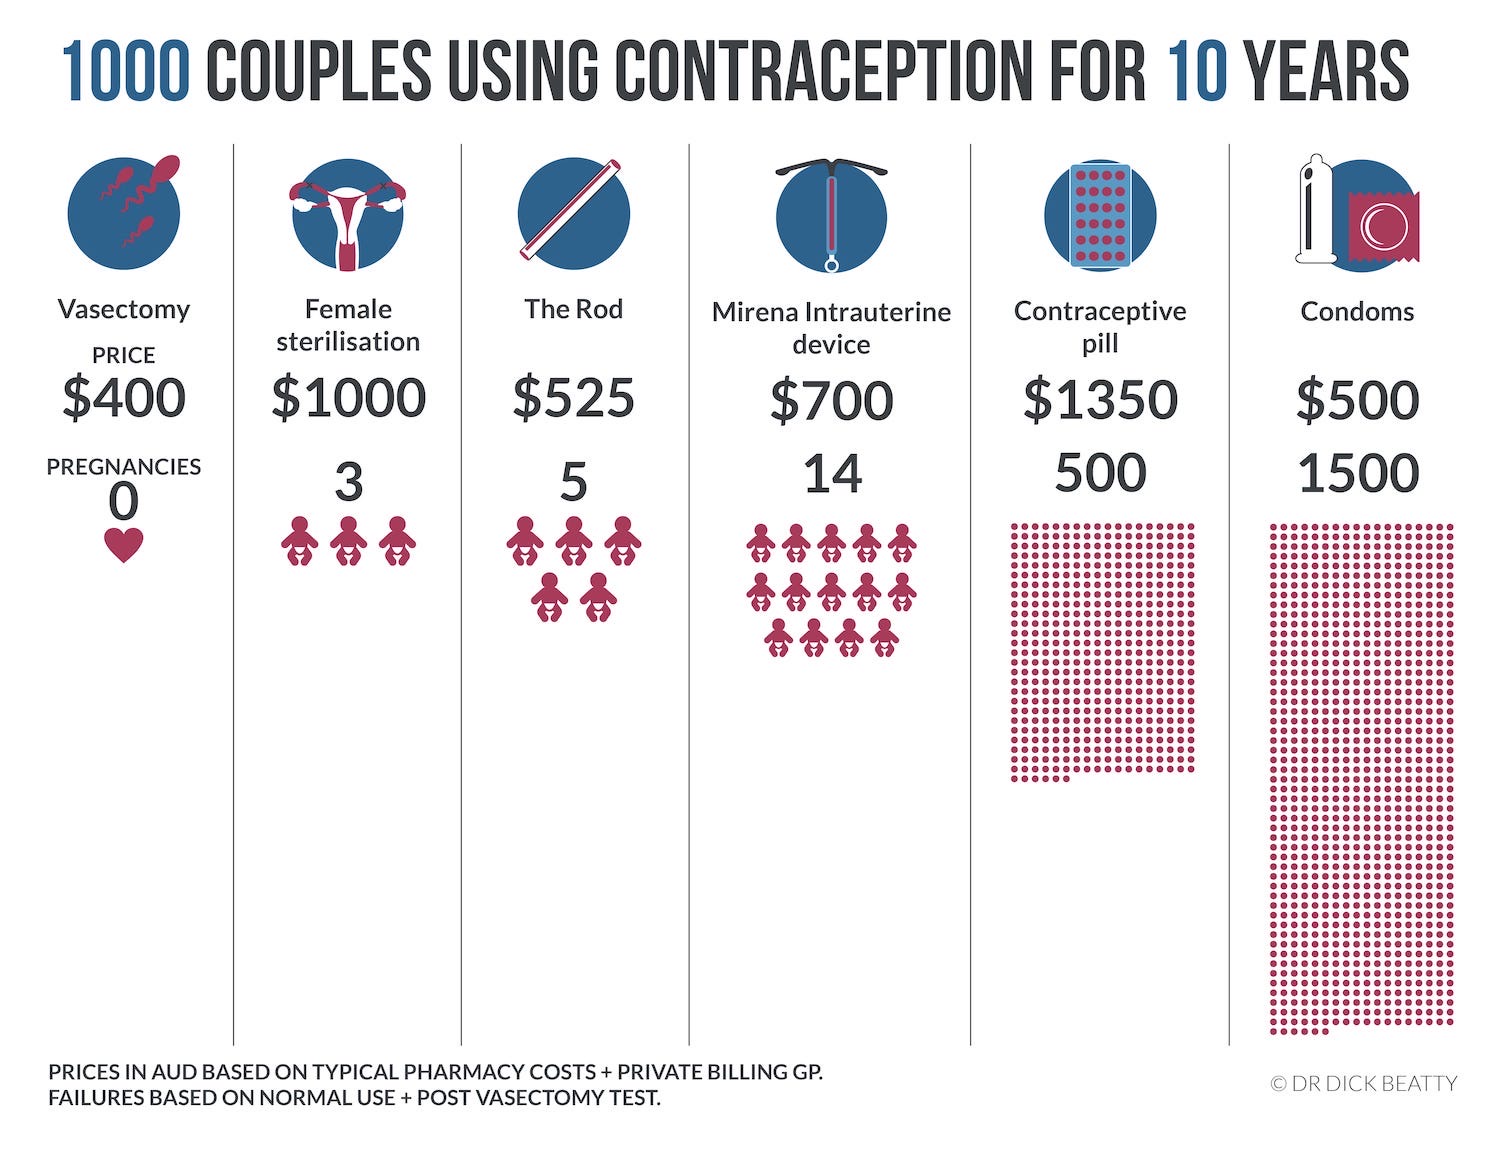 Contraception Infographic: comparing price and no. of pregnancies over 10 years (vasectomy, female sterilisation, the combined pill, IUD, female contraceptive implant)